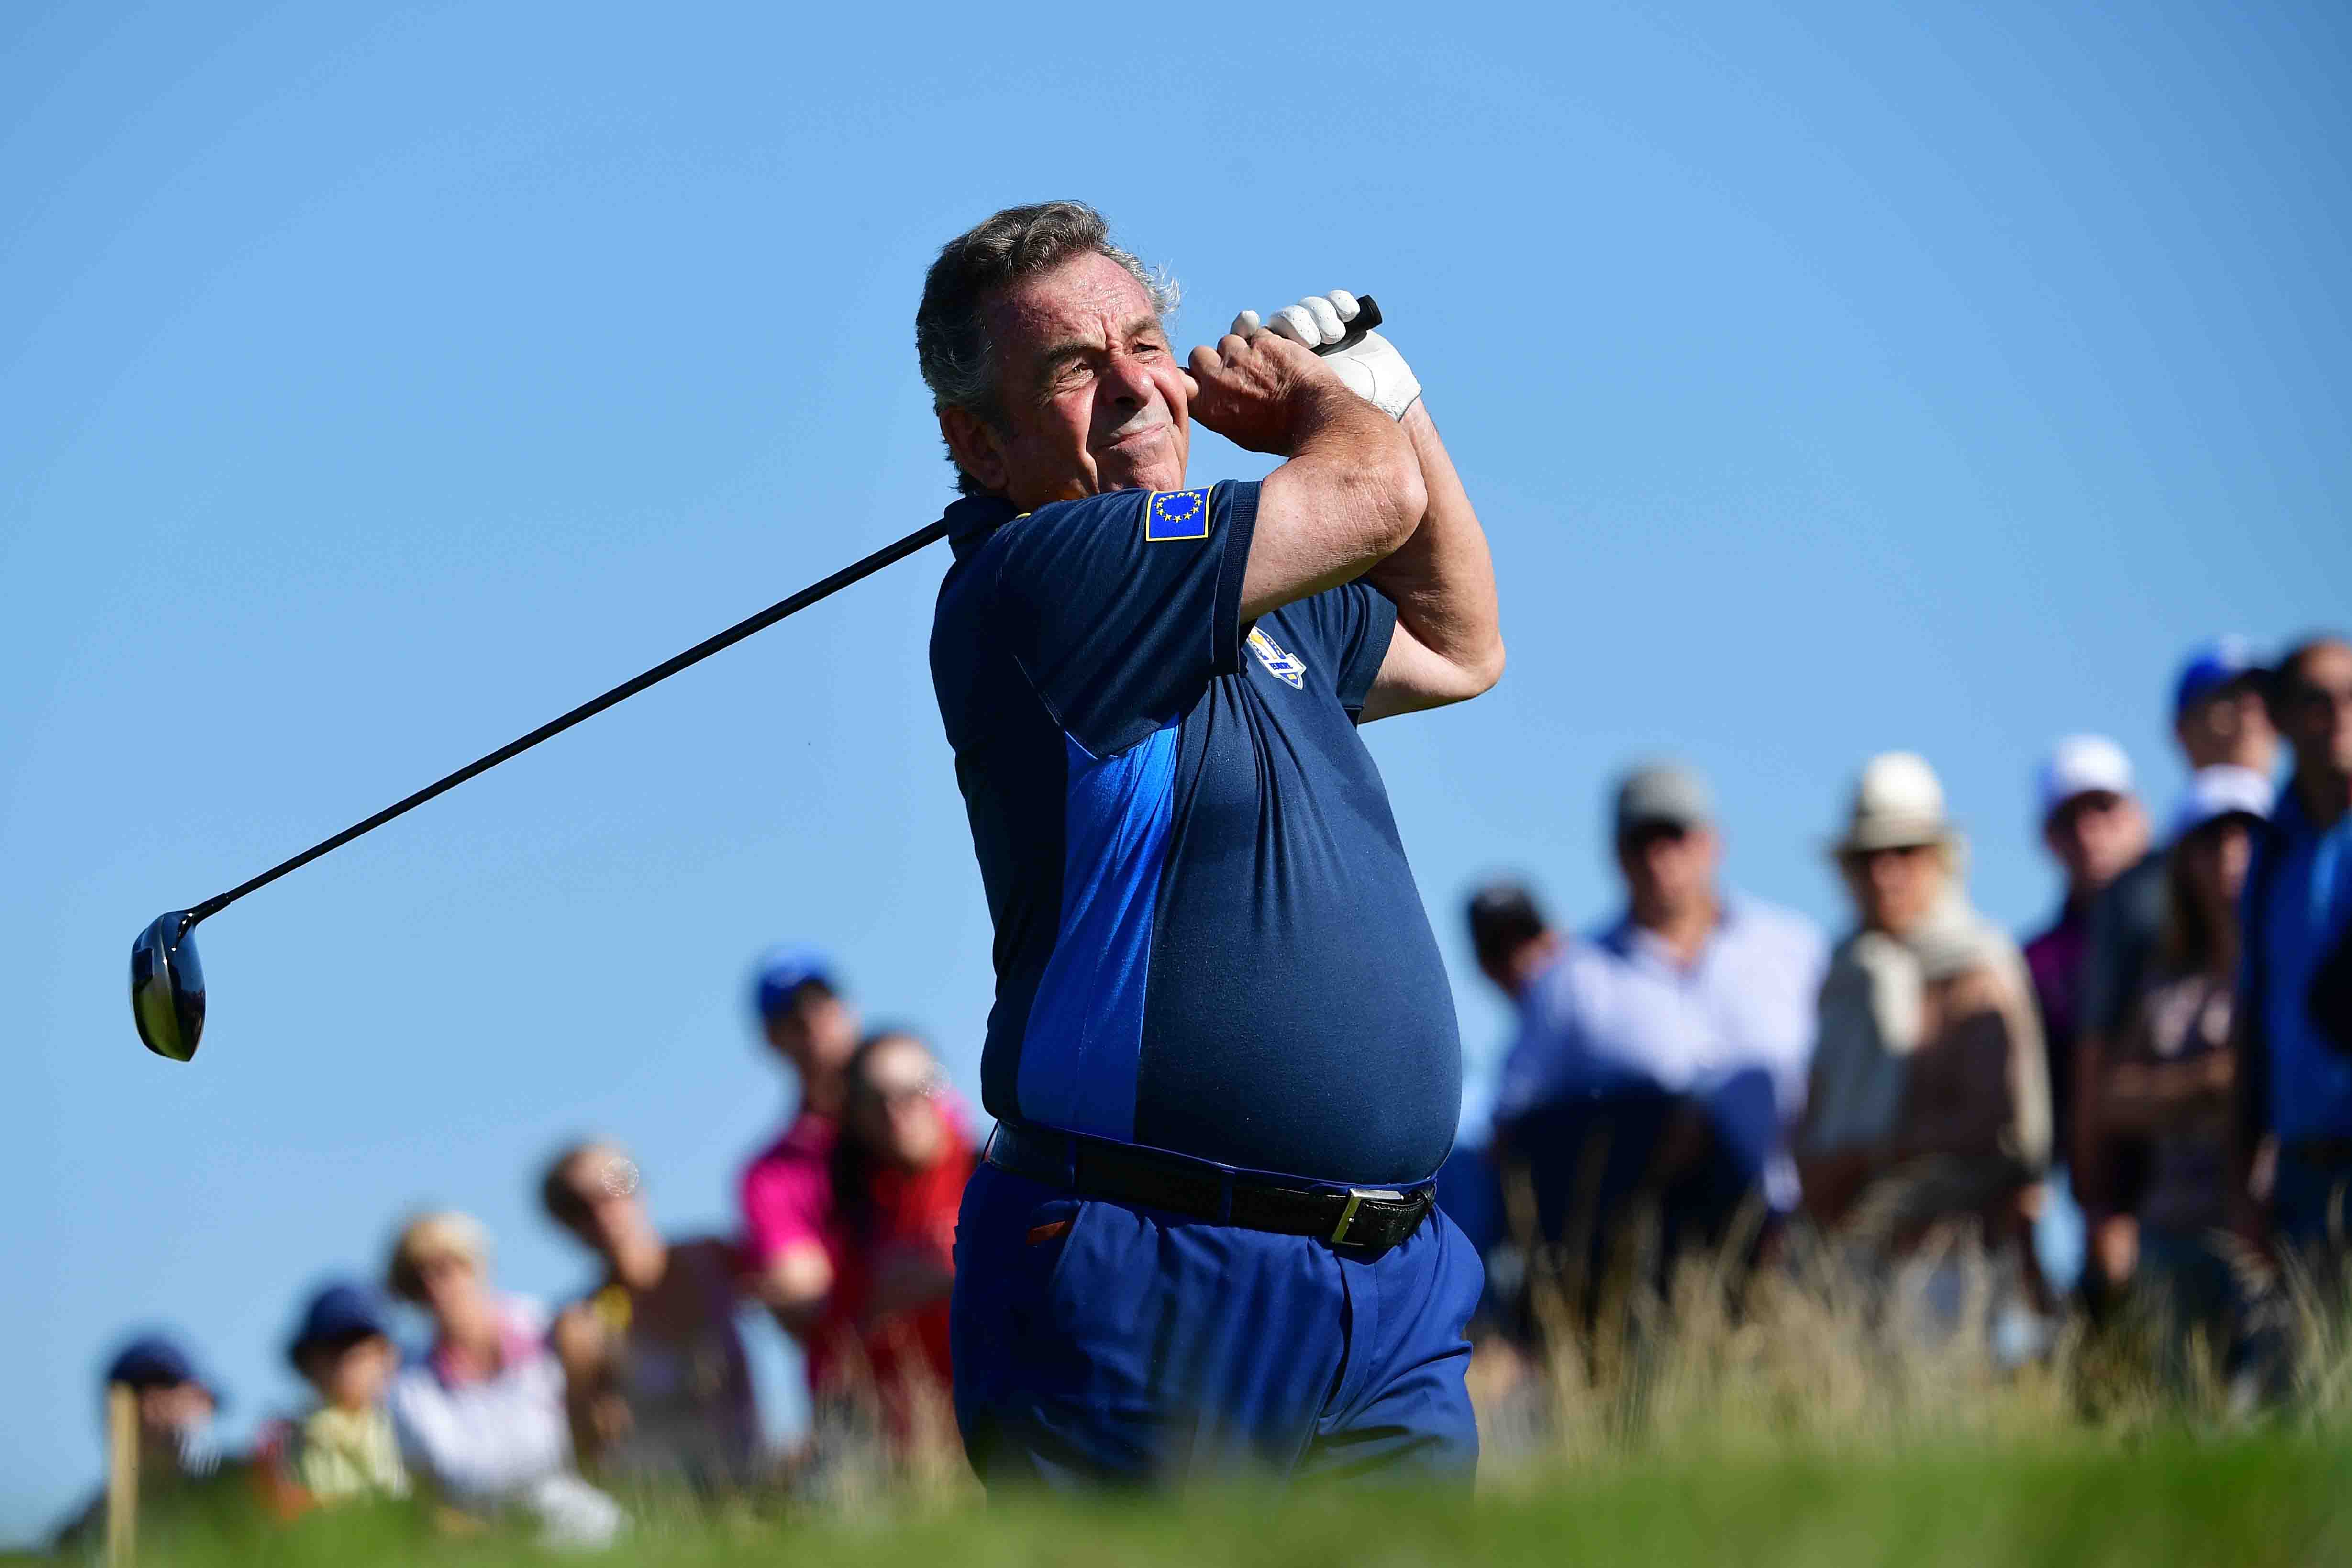 Jacklin: They messed around with the pro game too much – now golf is boring